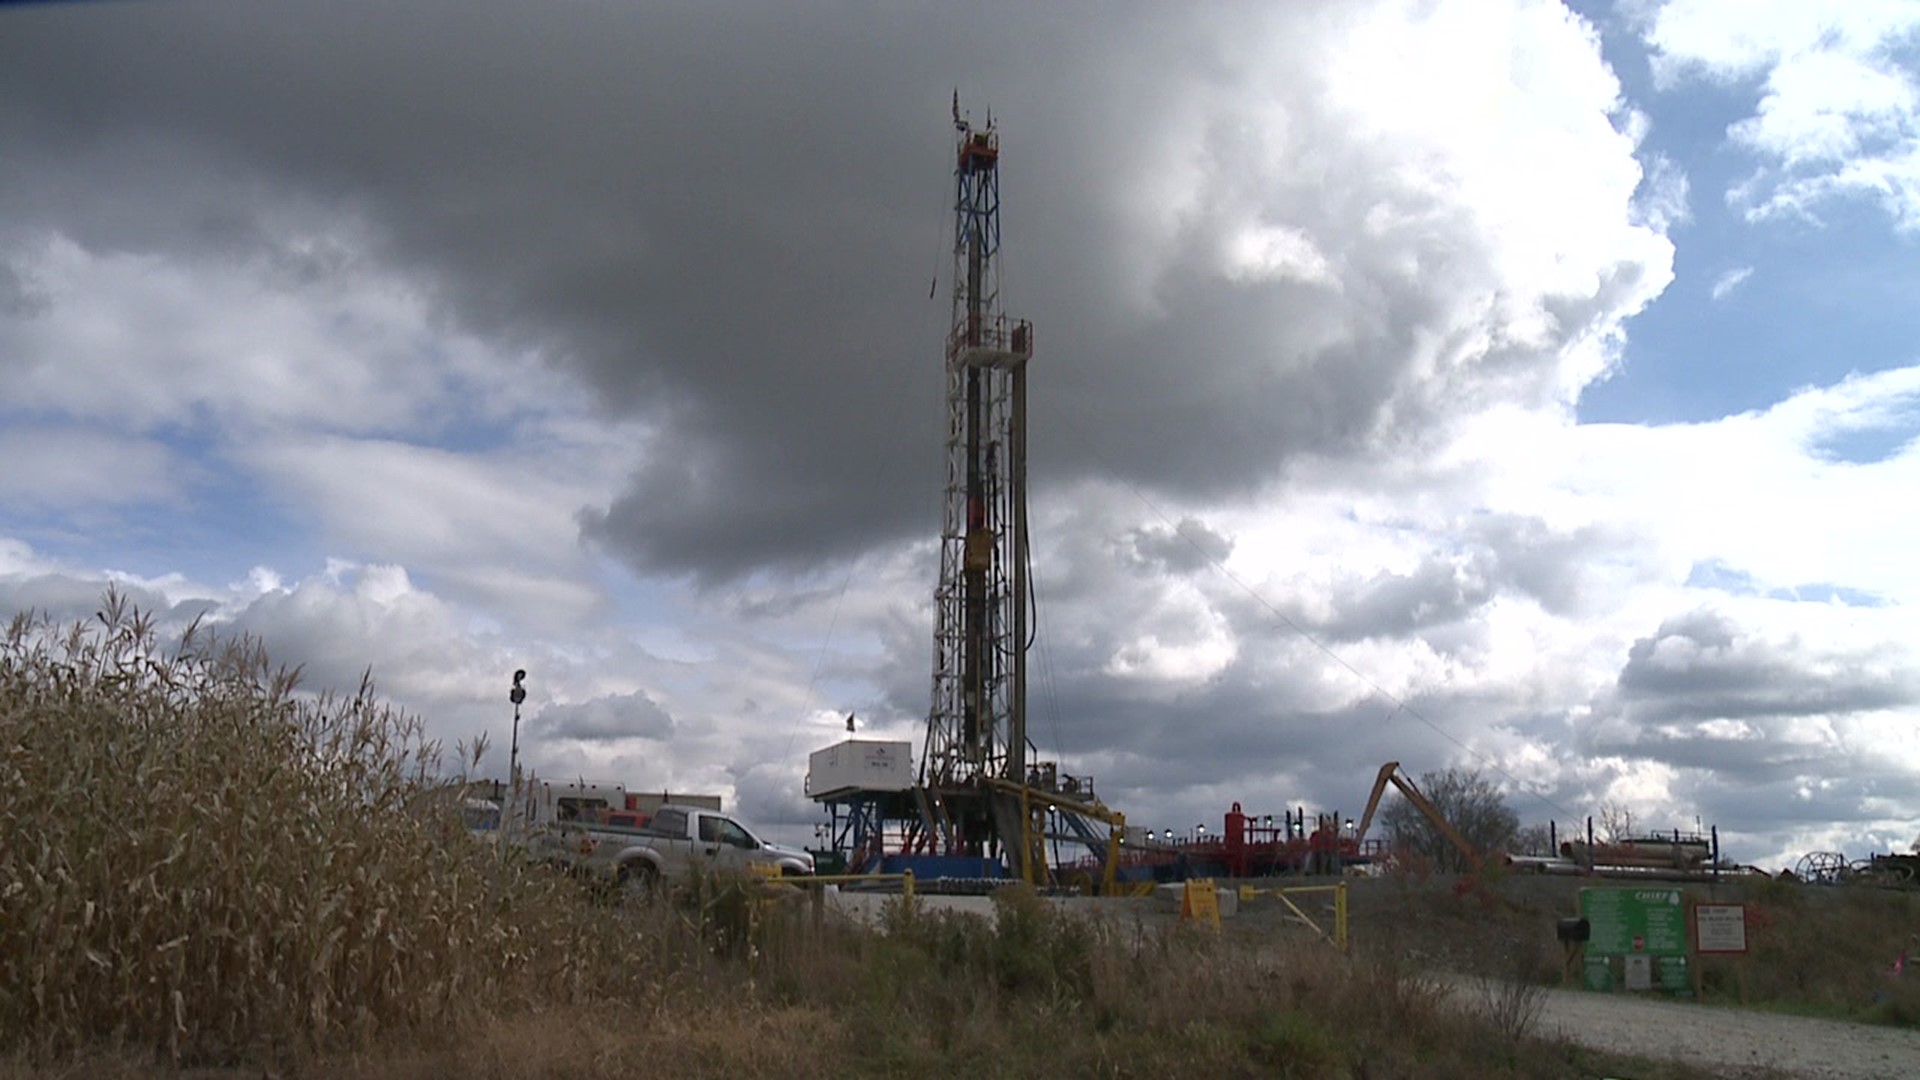 Newswatch 16's Courtney Harrison explains how natural gas produced in Susquehanna County factors into the president's plans for energy production and inflation.